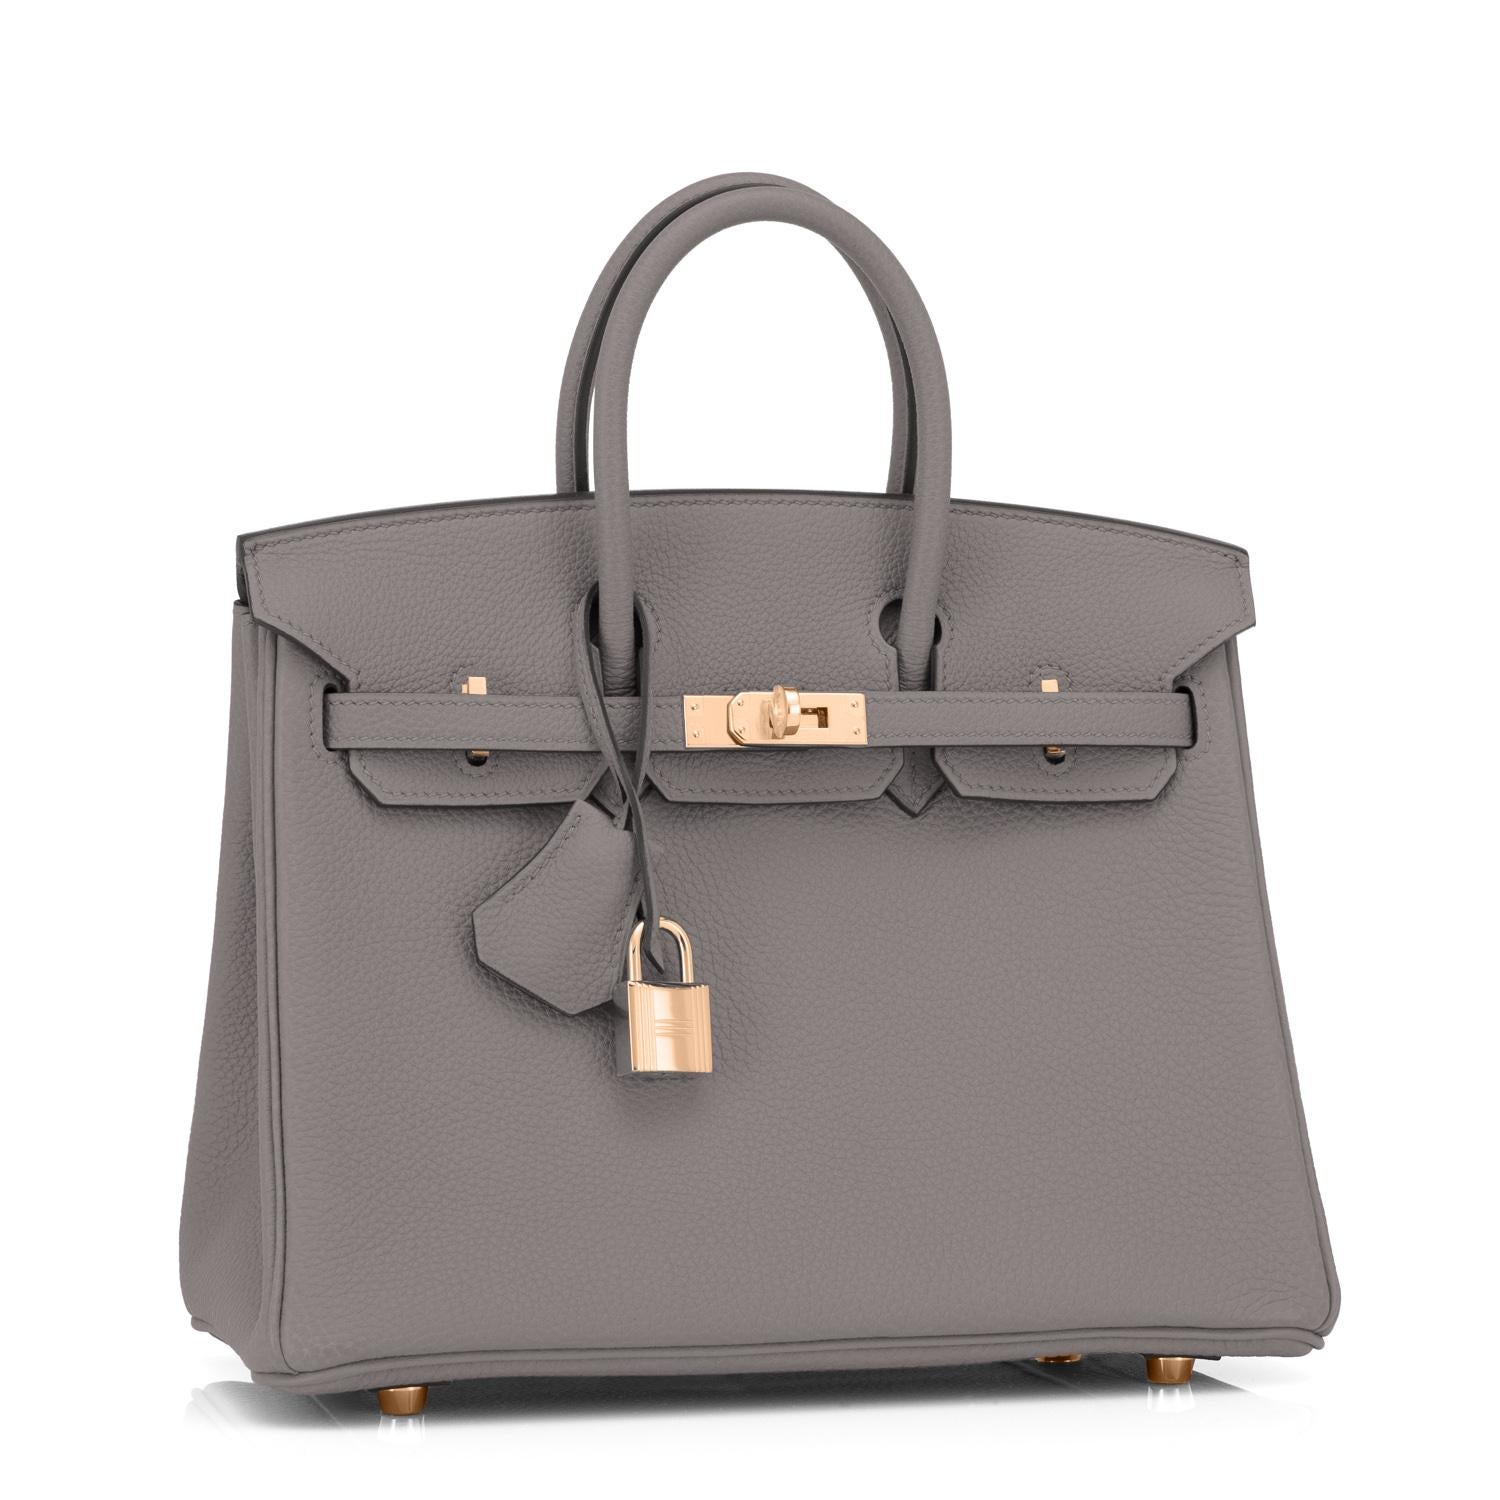 BANK WIRE PRICE ONLY
Hermes Birkin 25cm Etain Tin Grey Rose Gold Hardware Bag Z Stamp, 2021
Just purchased from Hermes store; bag bears new interior 2021 Z Stamp.
Brand New in Box. Store fresh. Pristine Condition (with plastic on hardware)
Perfect